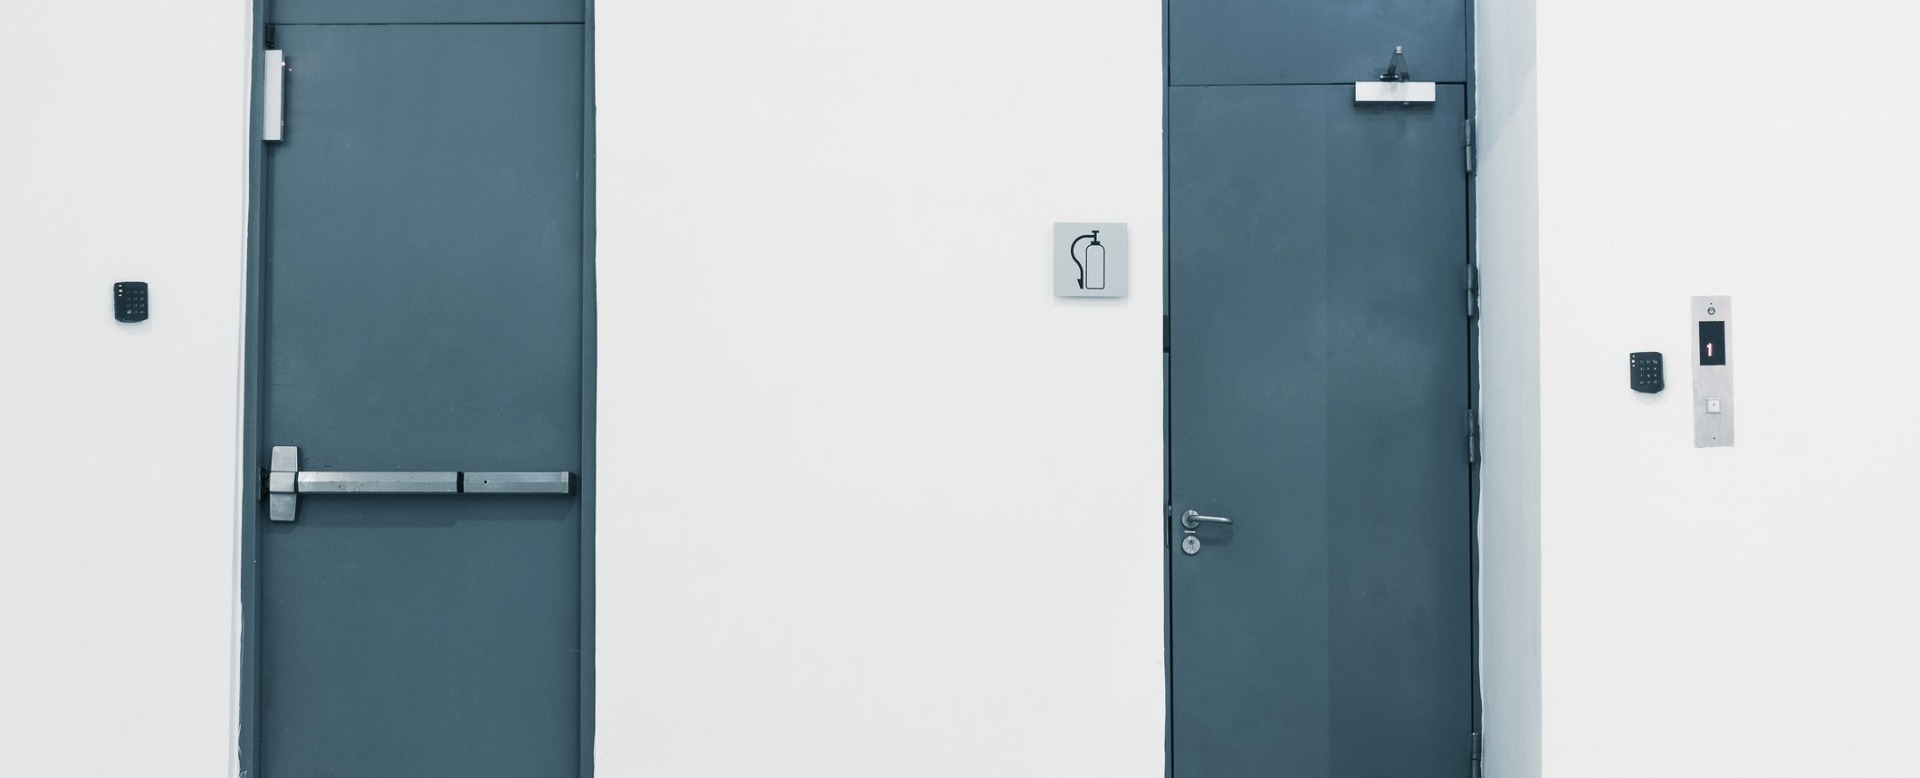 Blue steel exit and entrance doors installed with keypad code locks in close proximity for business warehouse